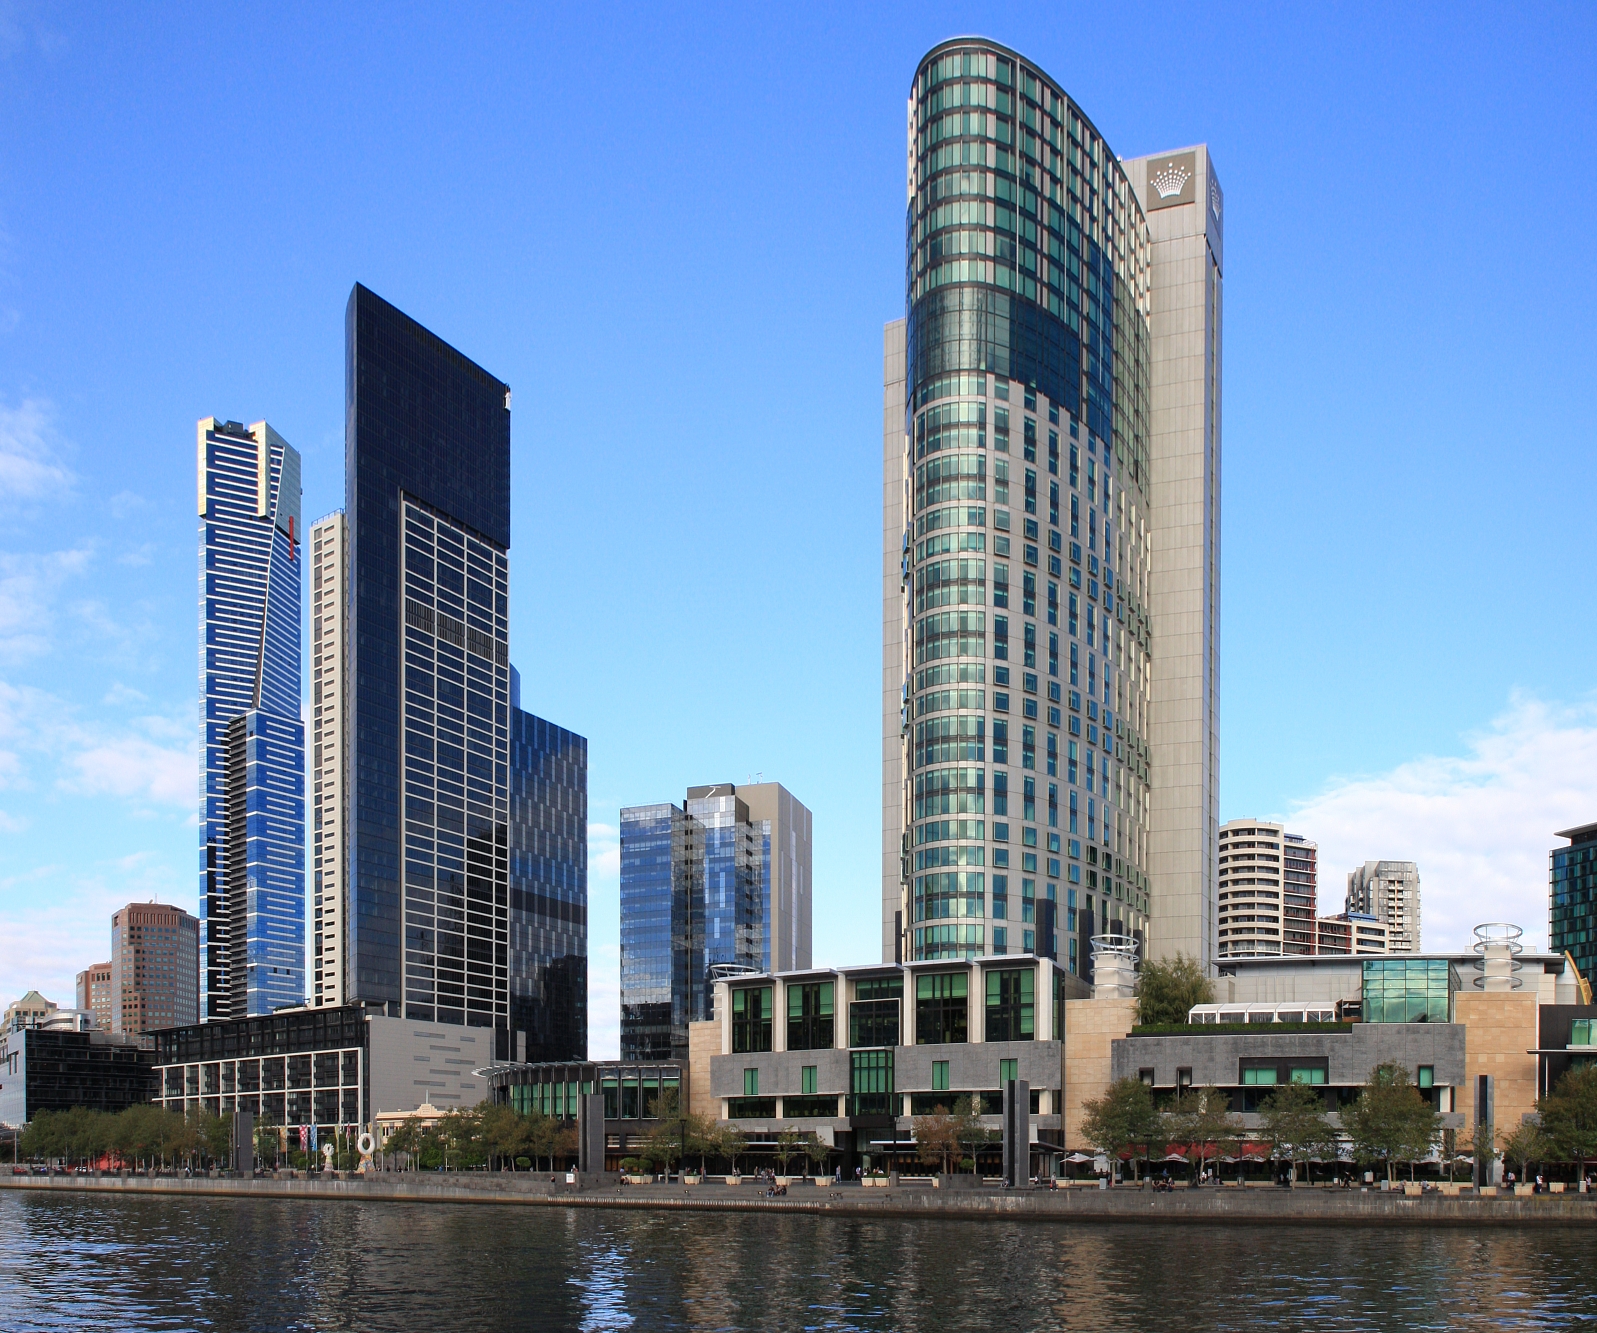 Crown Melbourne – Crown Casino -  Your Facade Experts